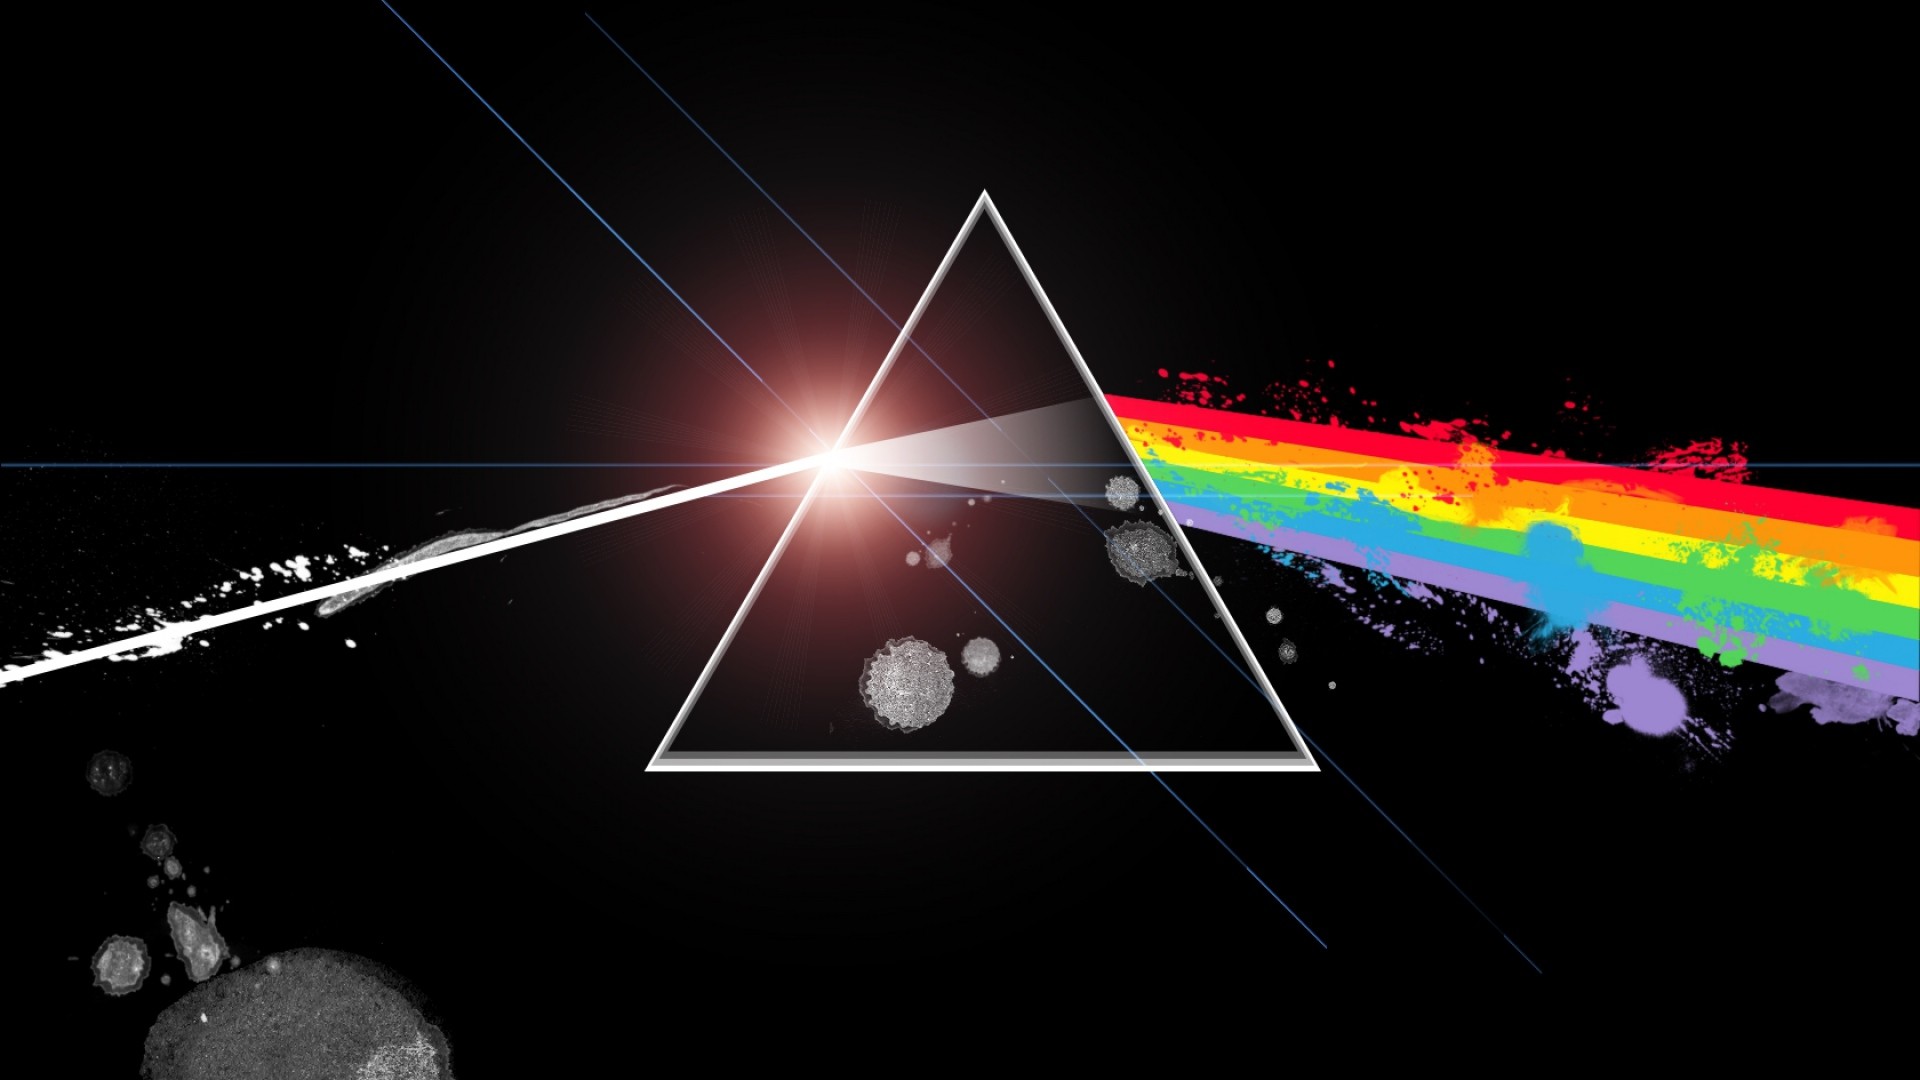 73+ Wallpapers Hd Pink Floyd For FREE - MyWeb